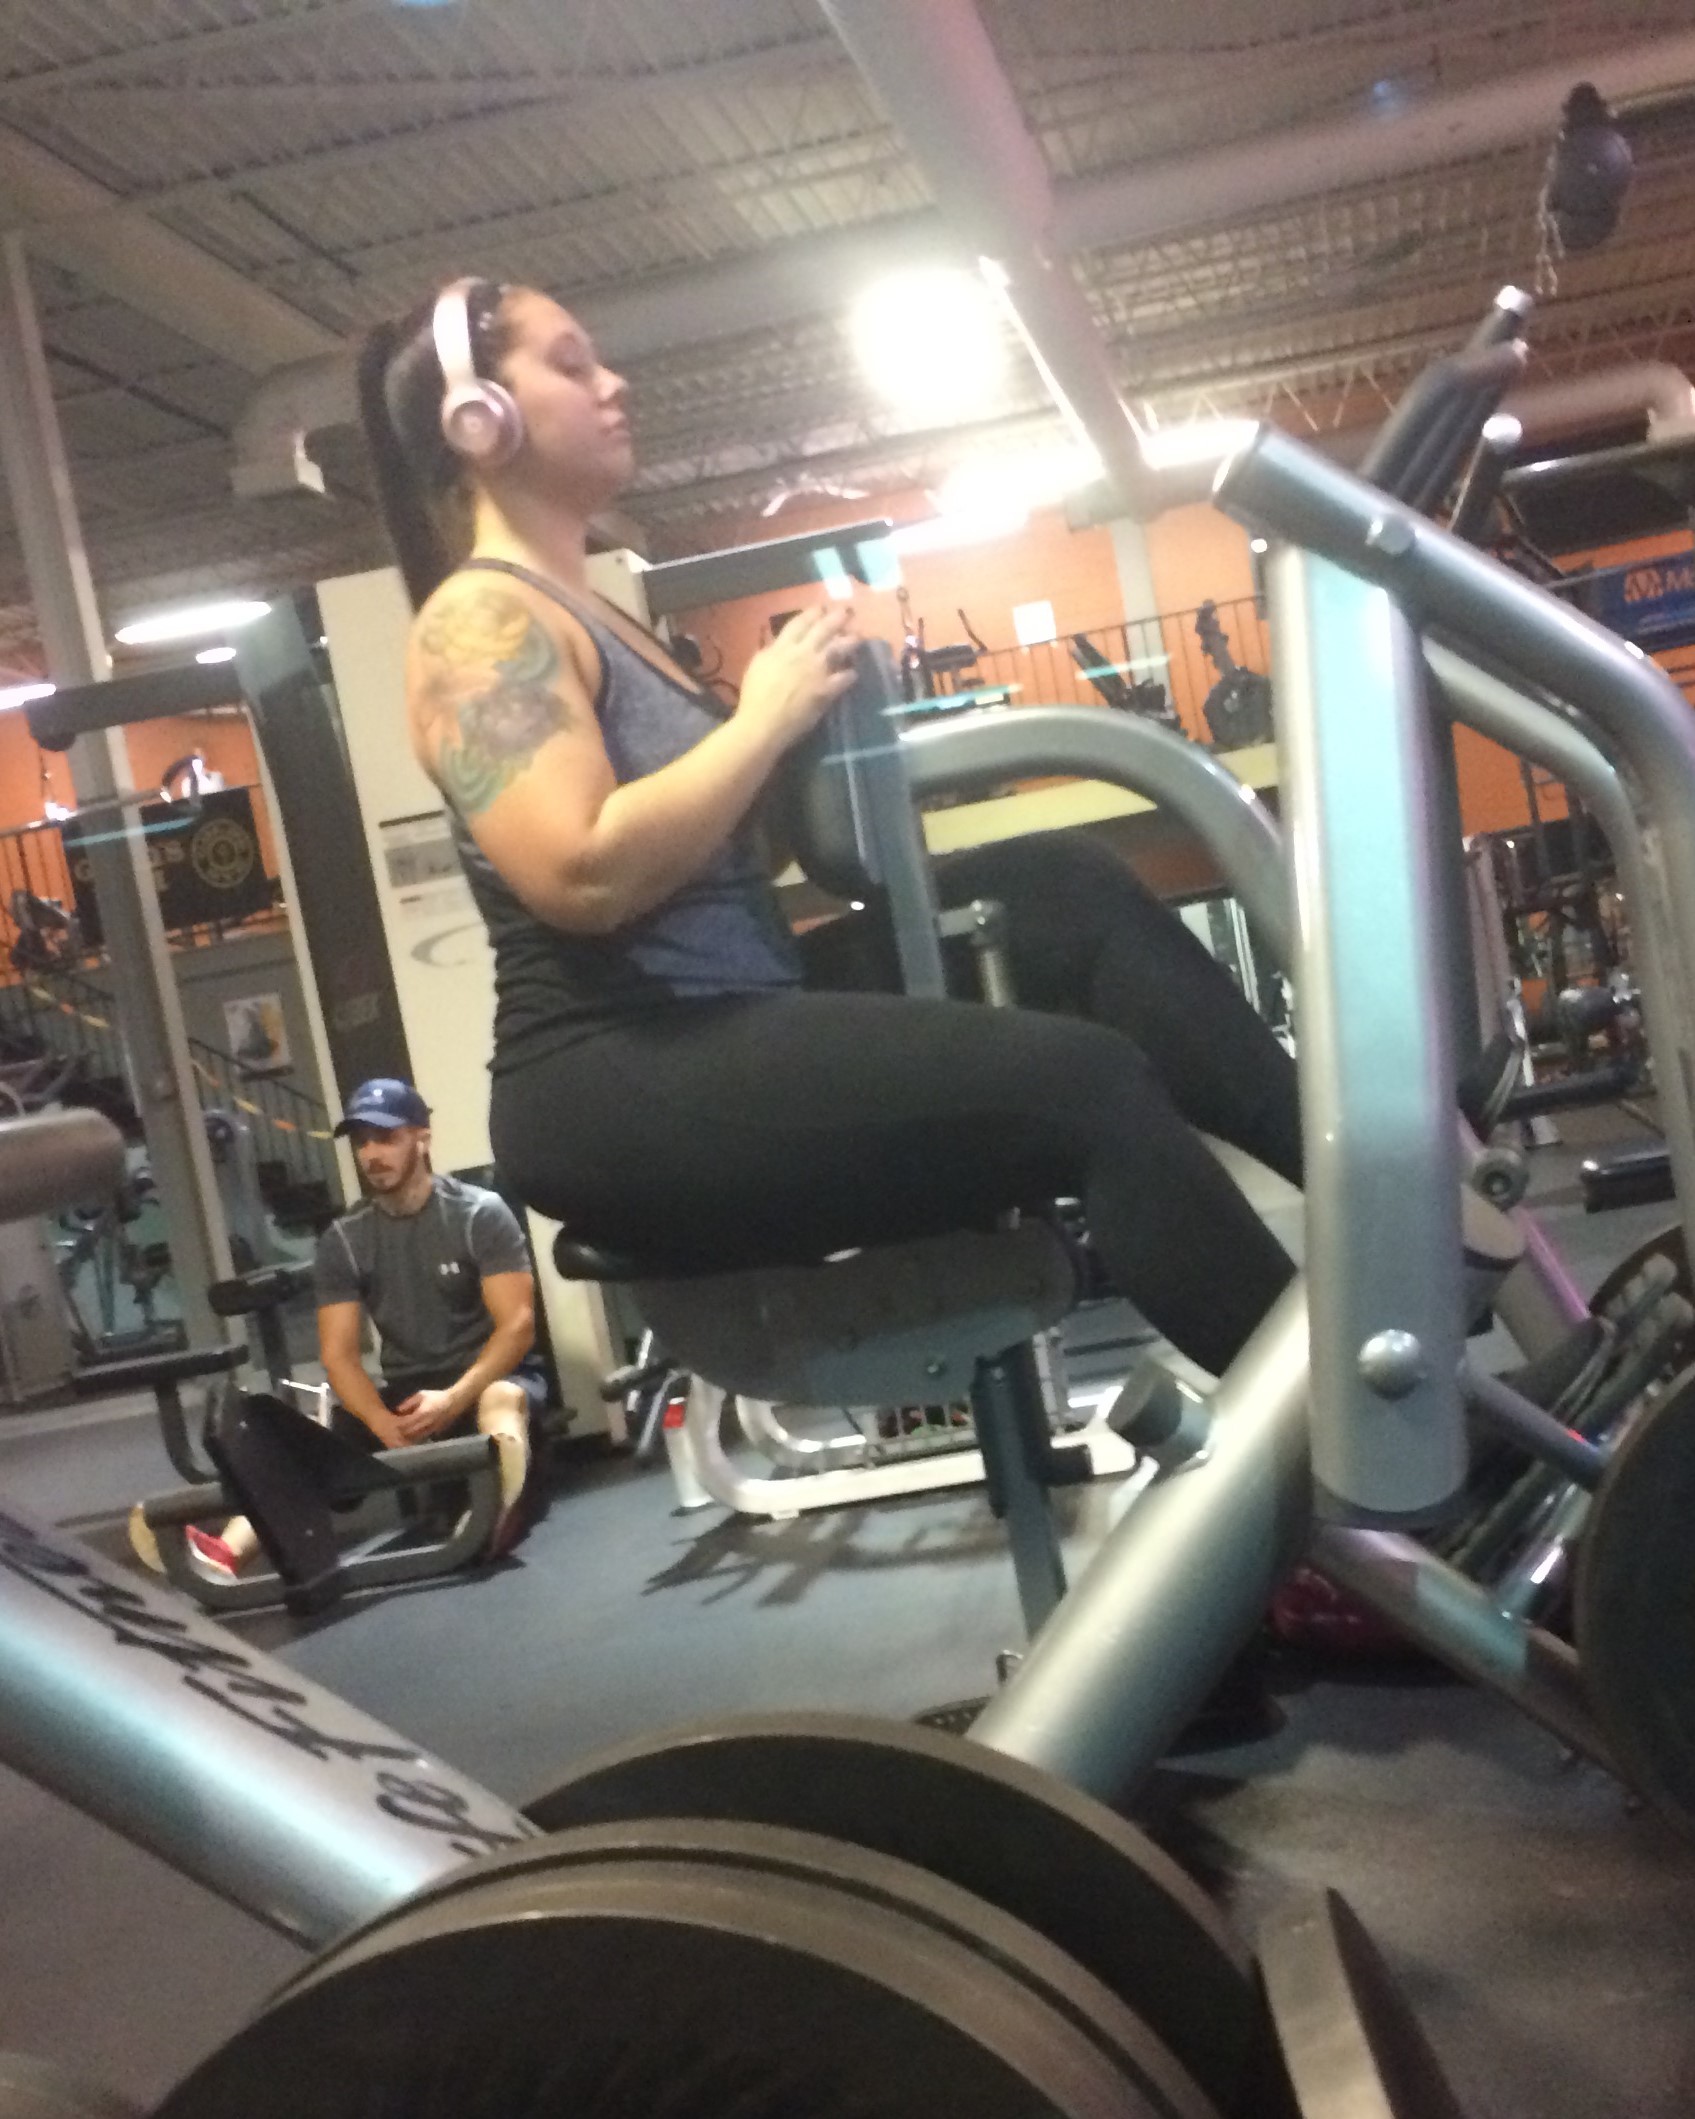 Thickness Fitness - PAWG 🎵 Getting Thicker🎵 - Spandex, Leggings & Yoga ...